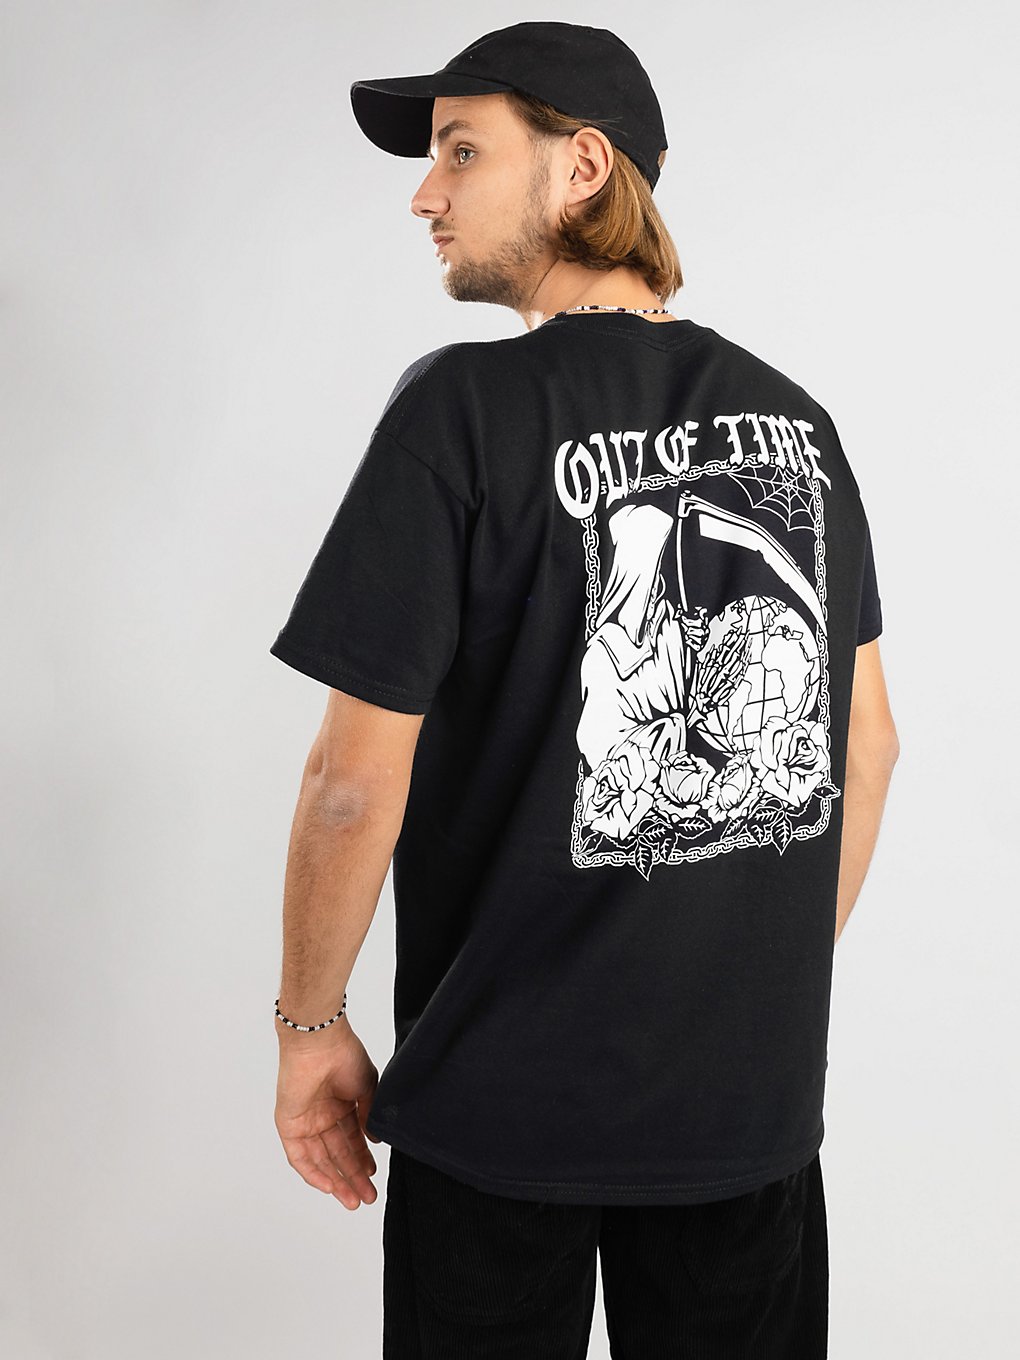 Empyre Out Of Time T-Shirt black kaufen